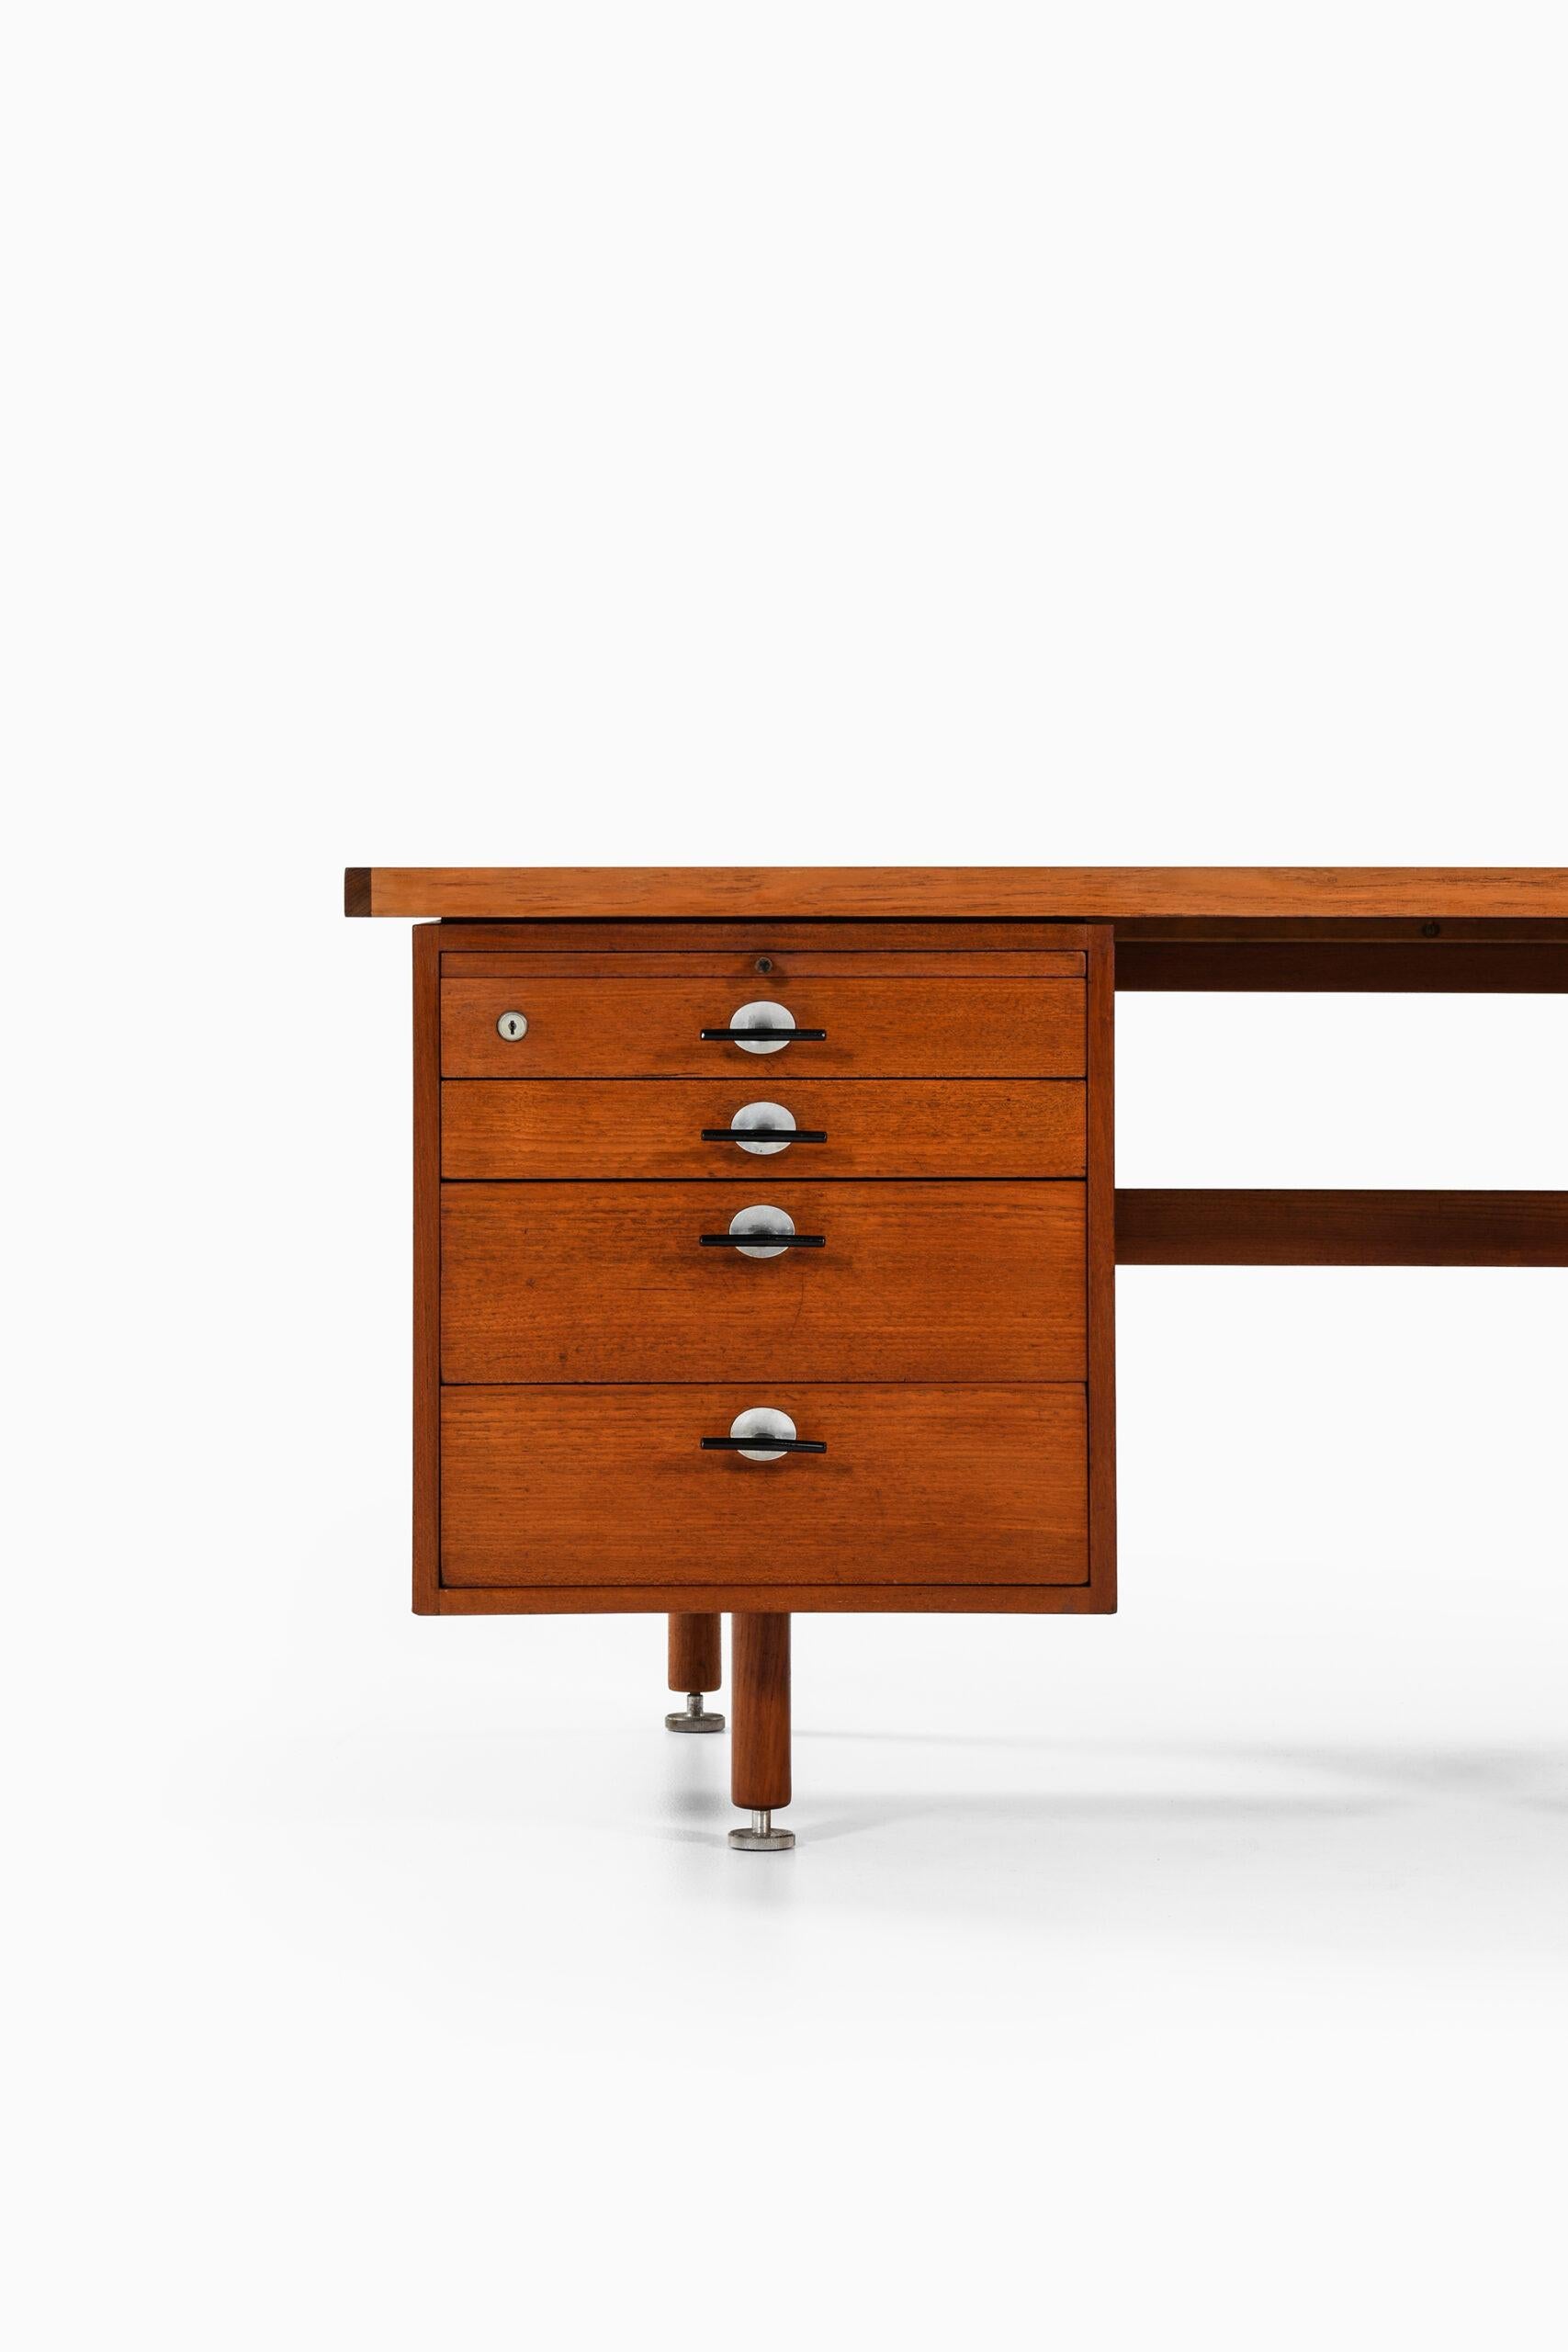 Rare large executive desk designed by Jens Risom. Produced by Gutenberghus in Denmark.